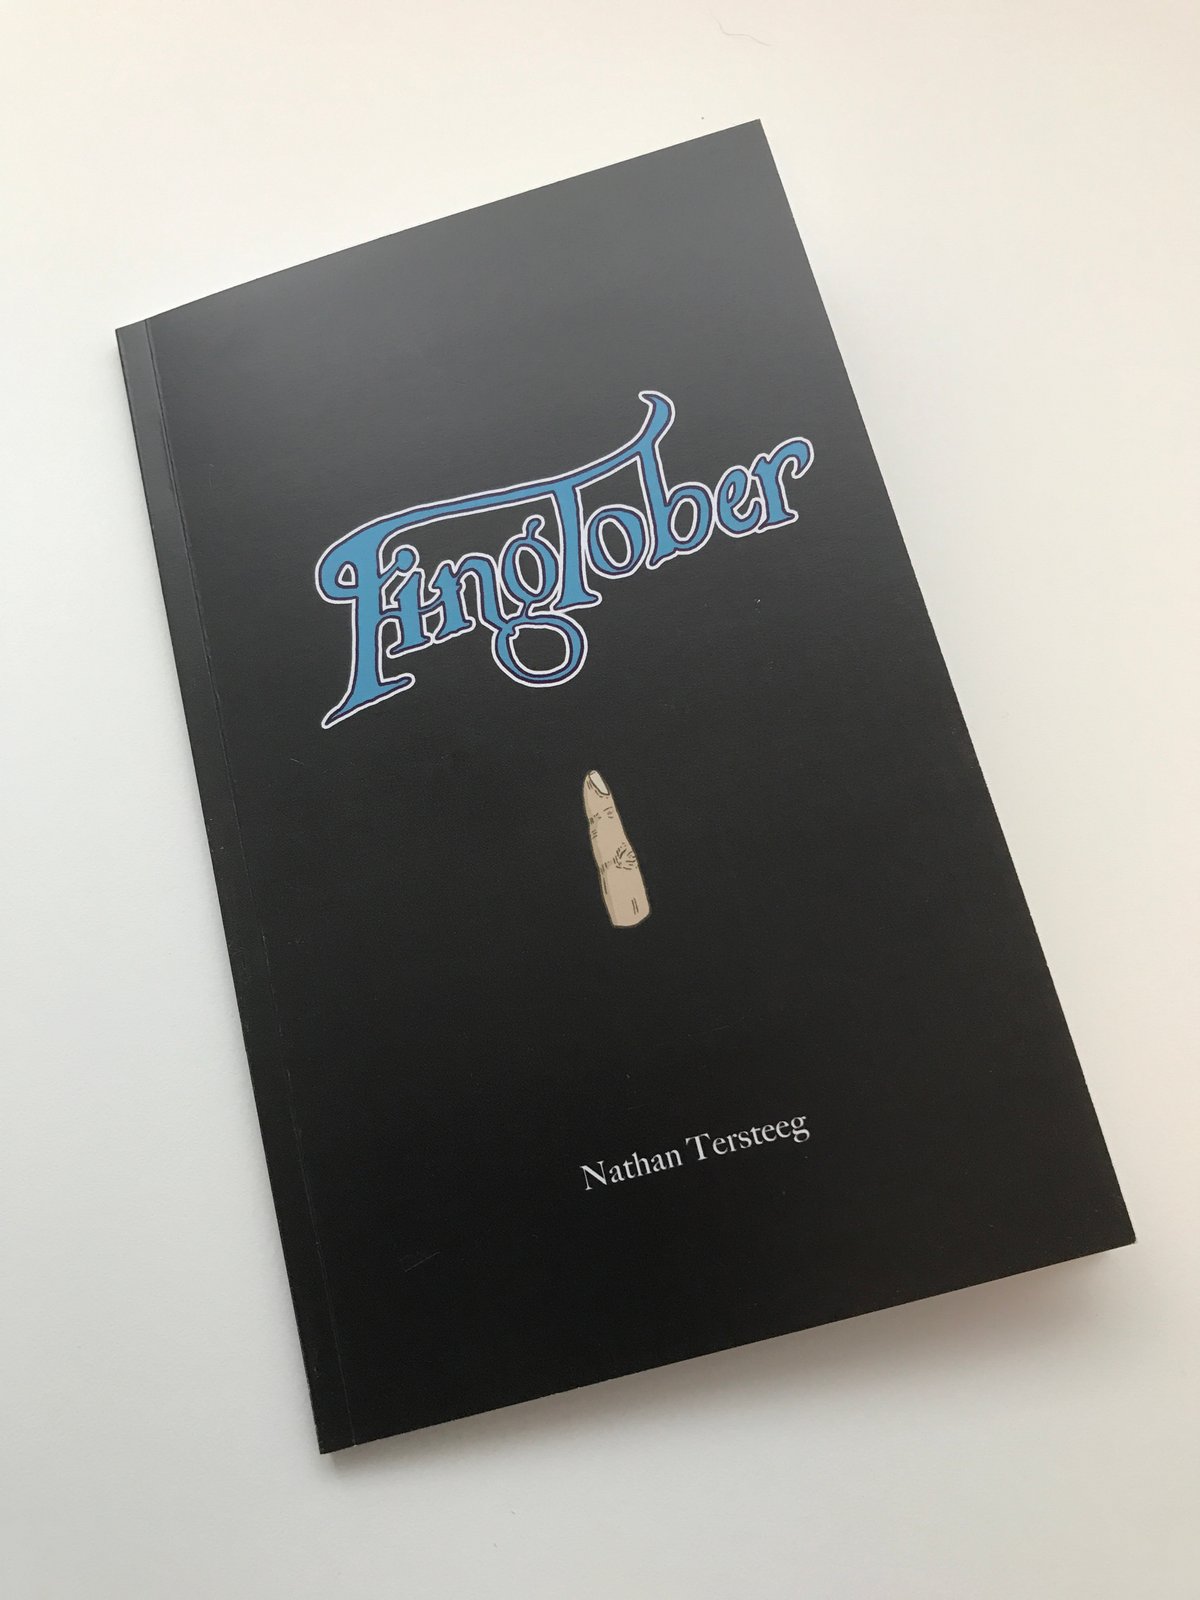 Image of Fingtober - The Book